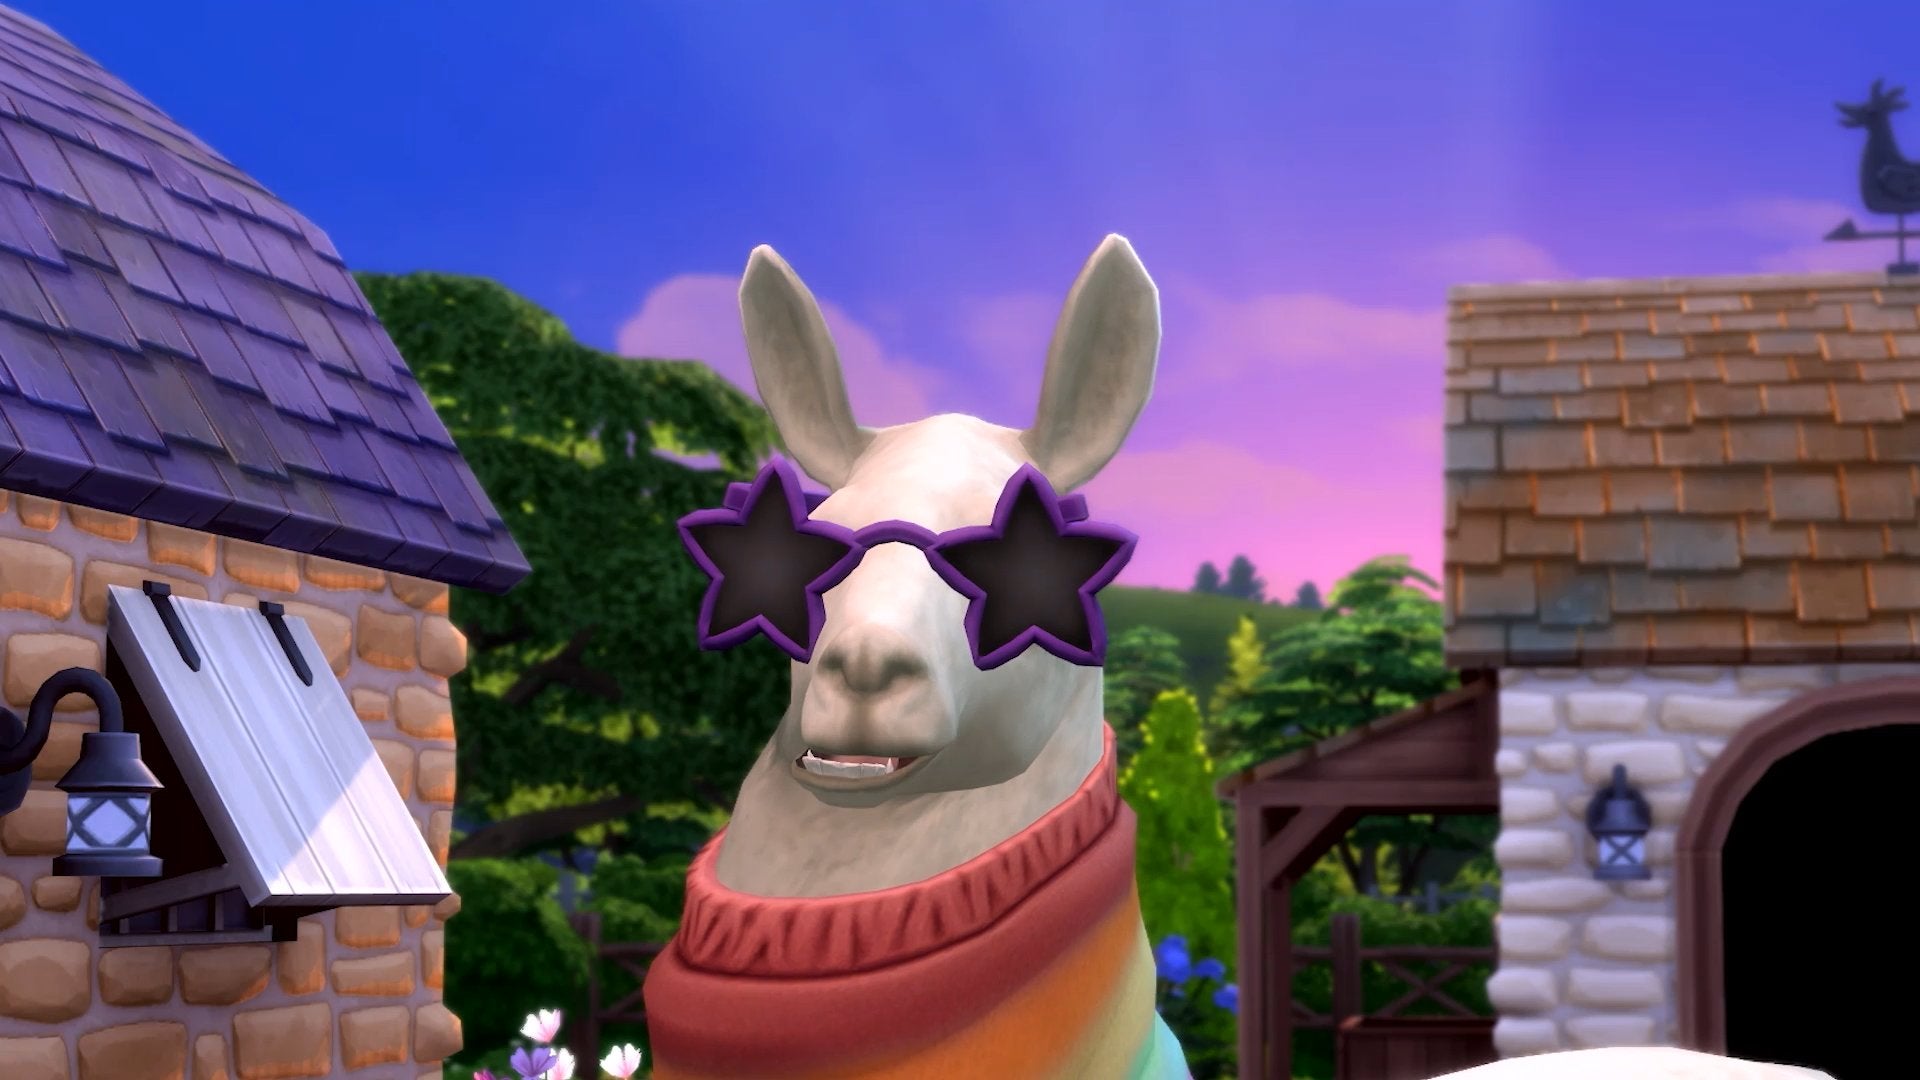 Close up of a llama wearing star shaped sunglasses and a rainbow scarf.